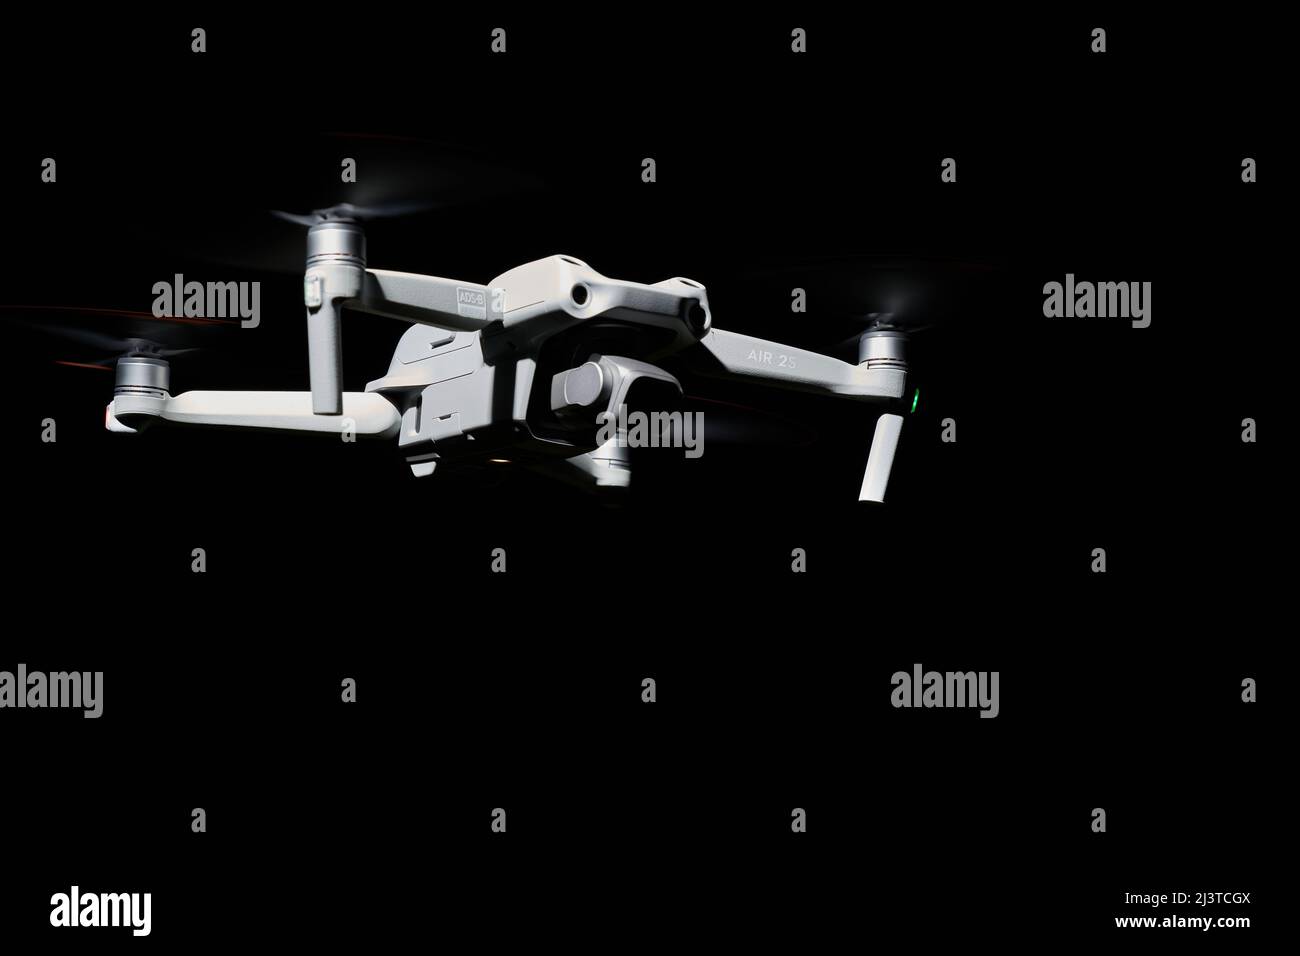 Nürtingen, Germany - June 26, 2021: Drone dji air 2s. Isolated on black. Illuminated with 1 flash at night. Side view. Copy space. Stock Photo